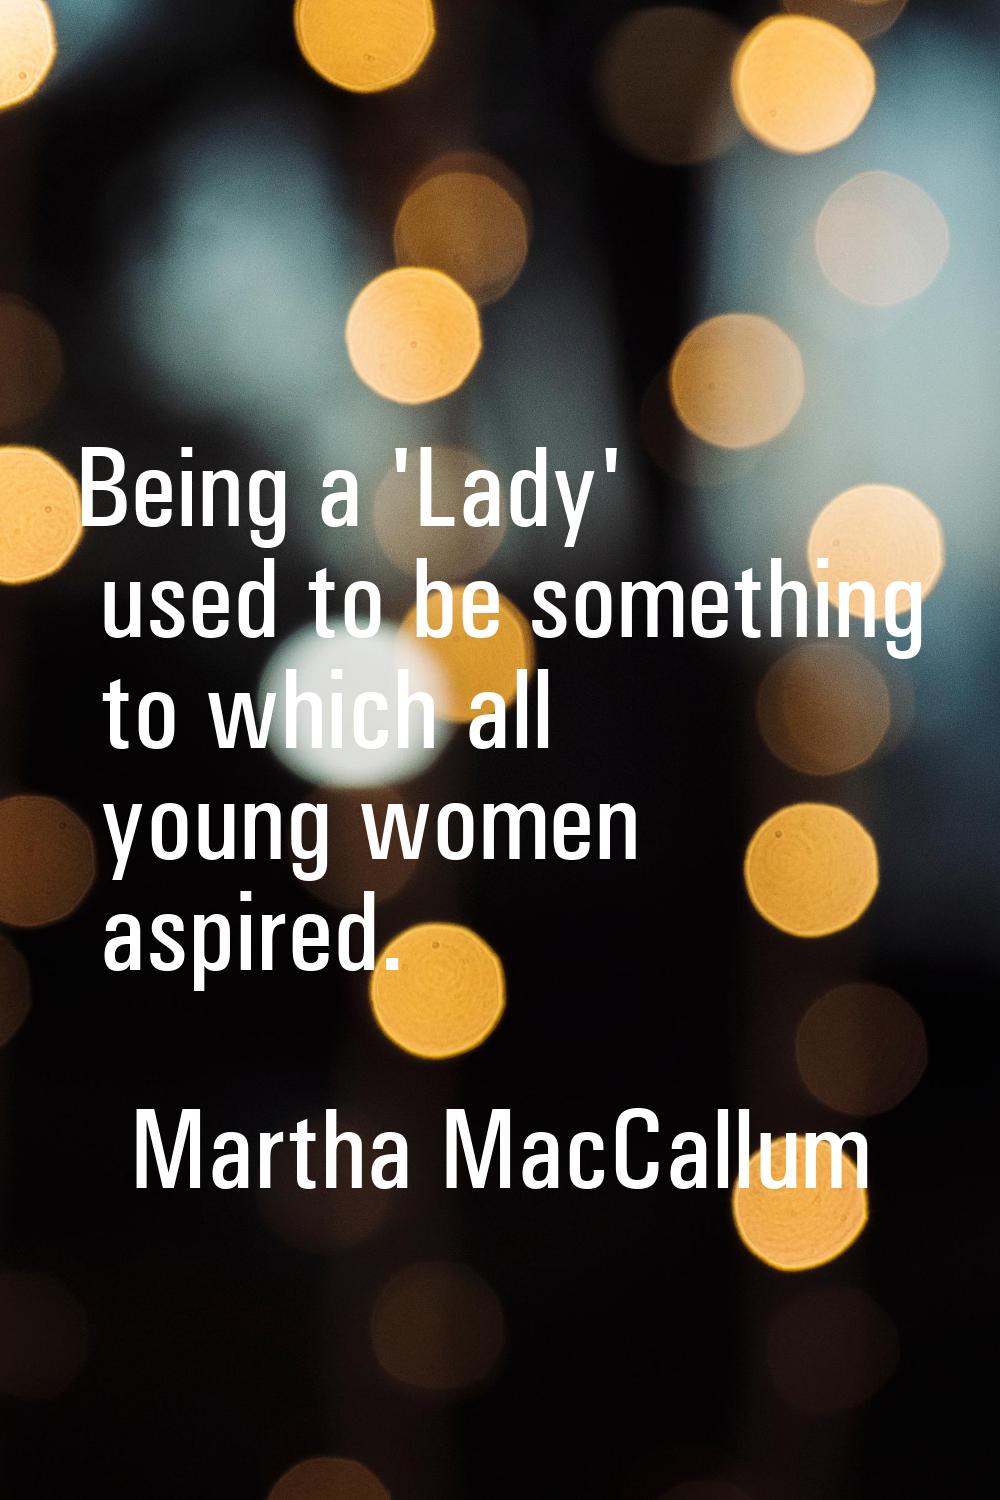 Being a 'Lady' used to be something to which all young women aspired.